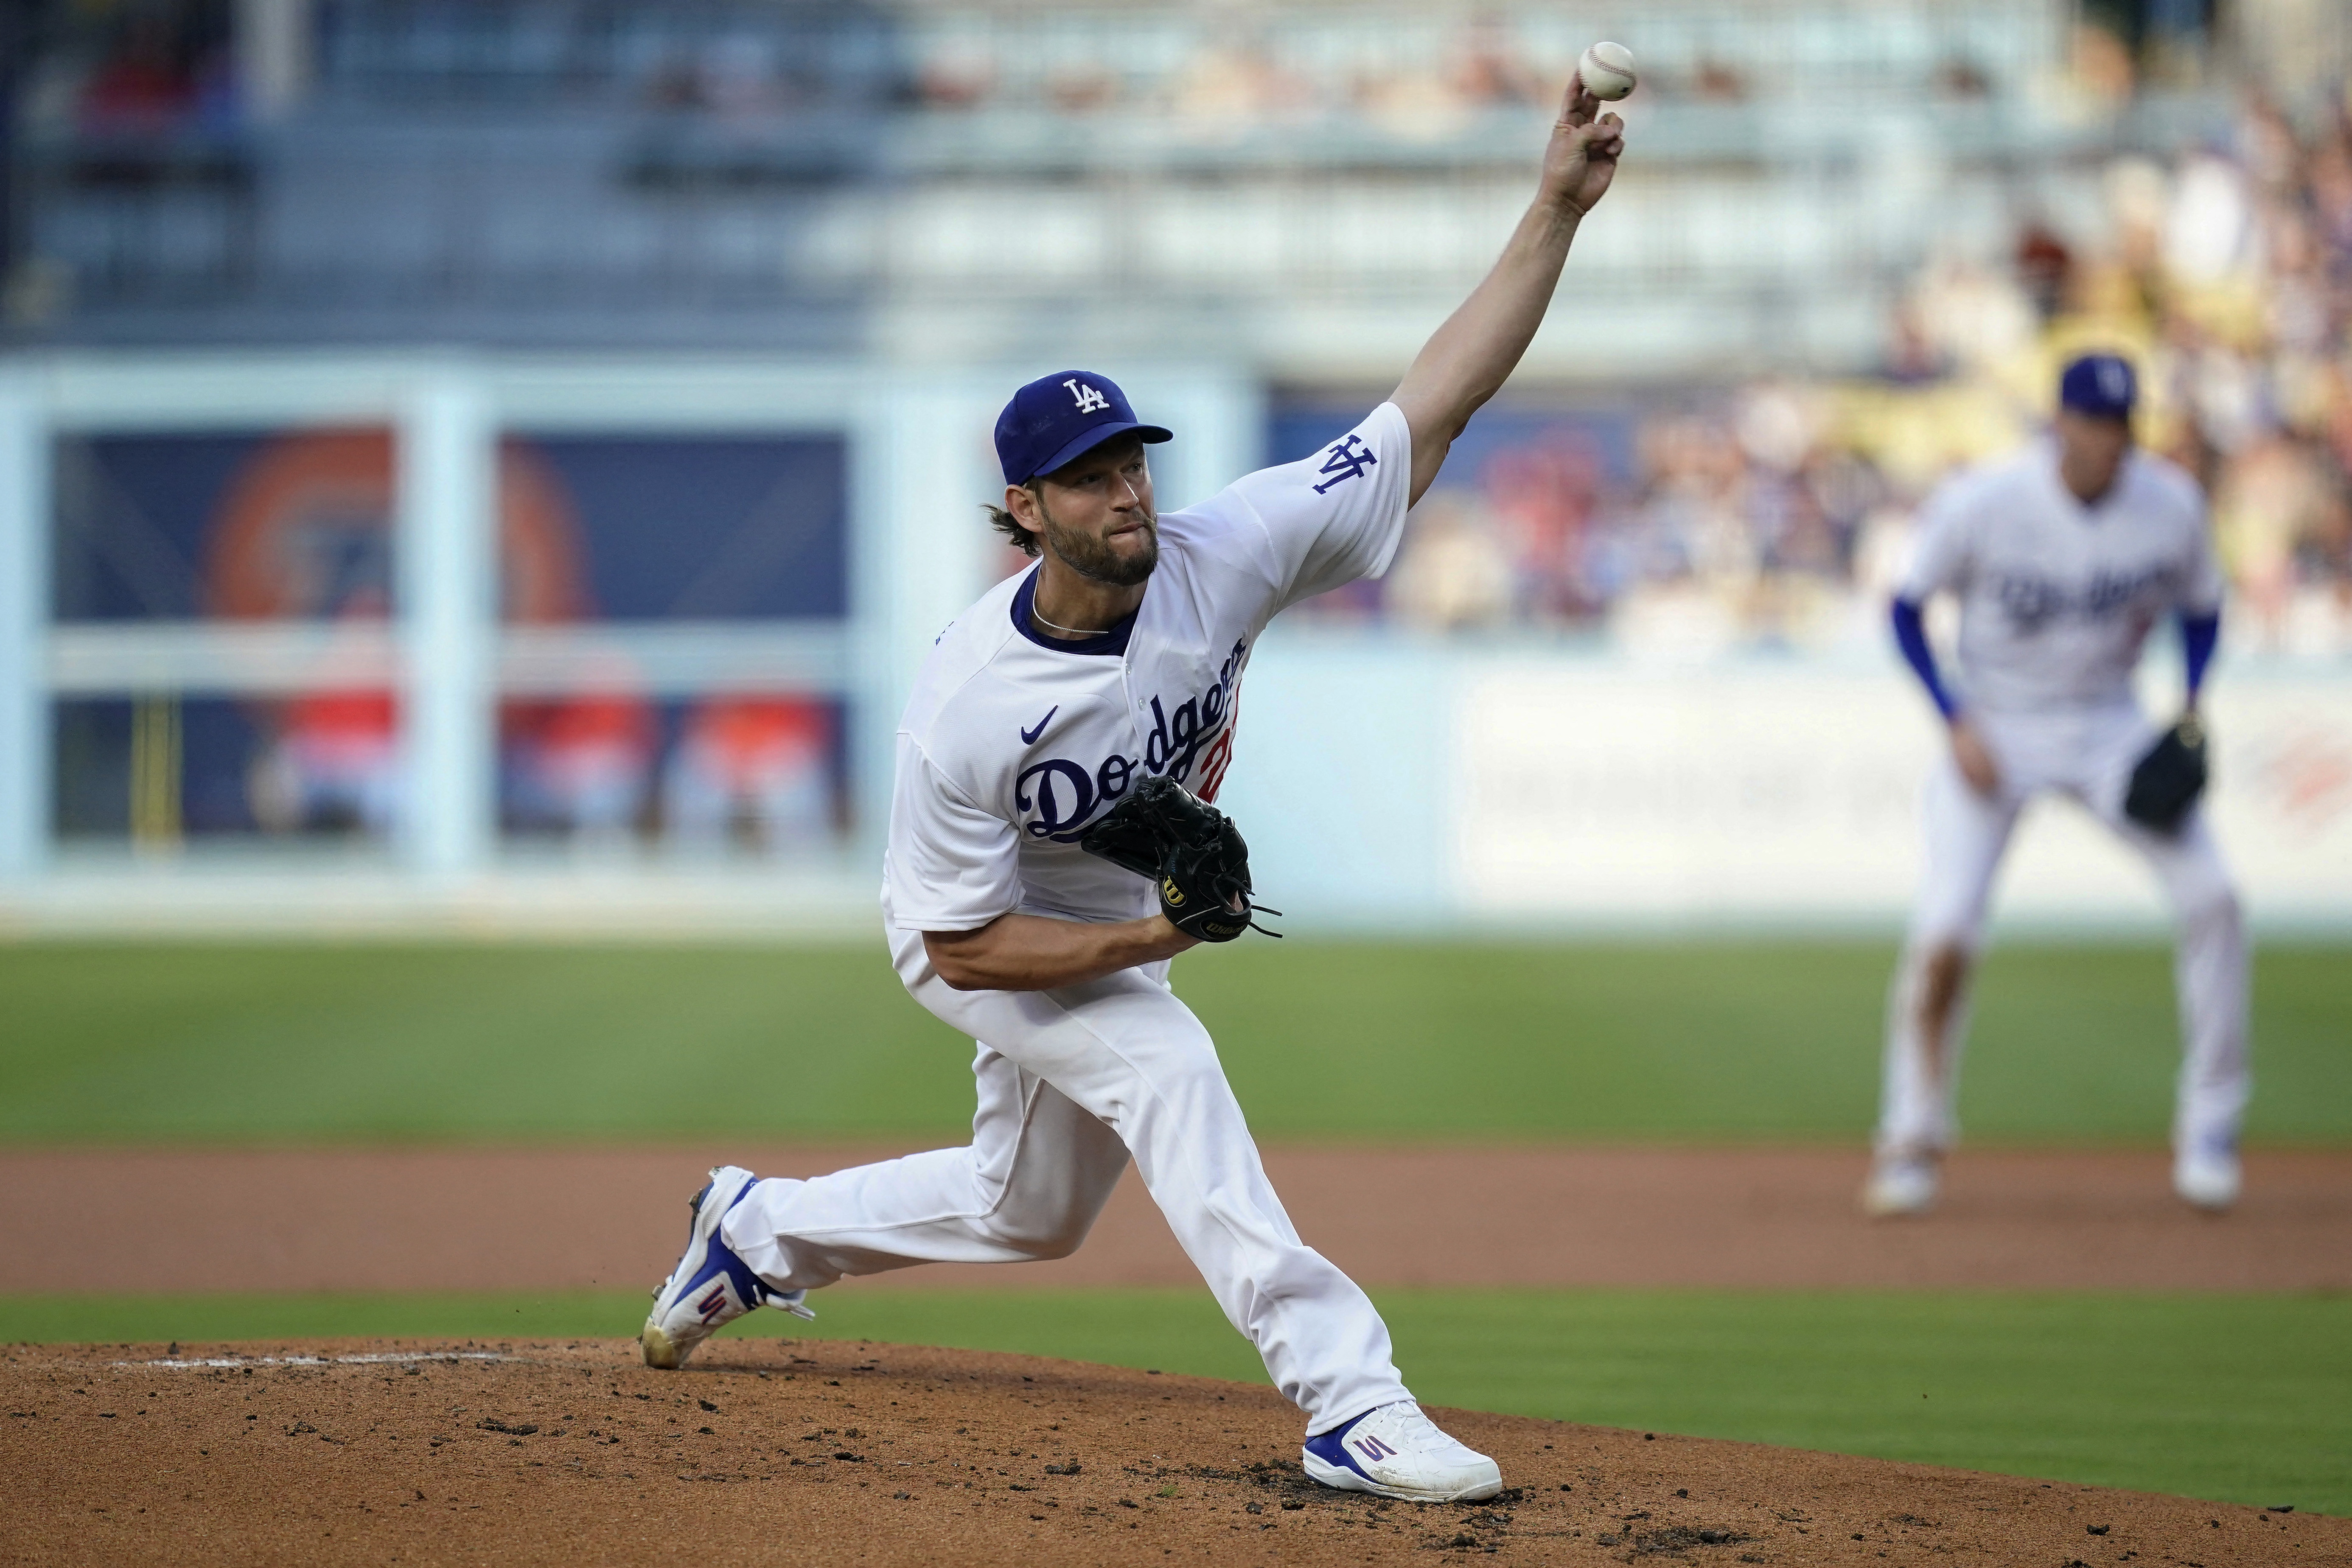 Clayton Kershaw helps Los Angeles Dodgers force Game 5 against New